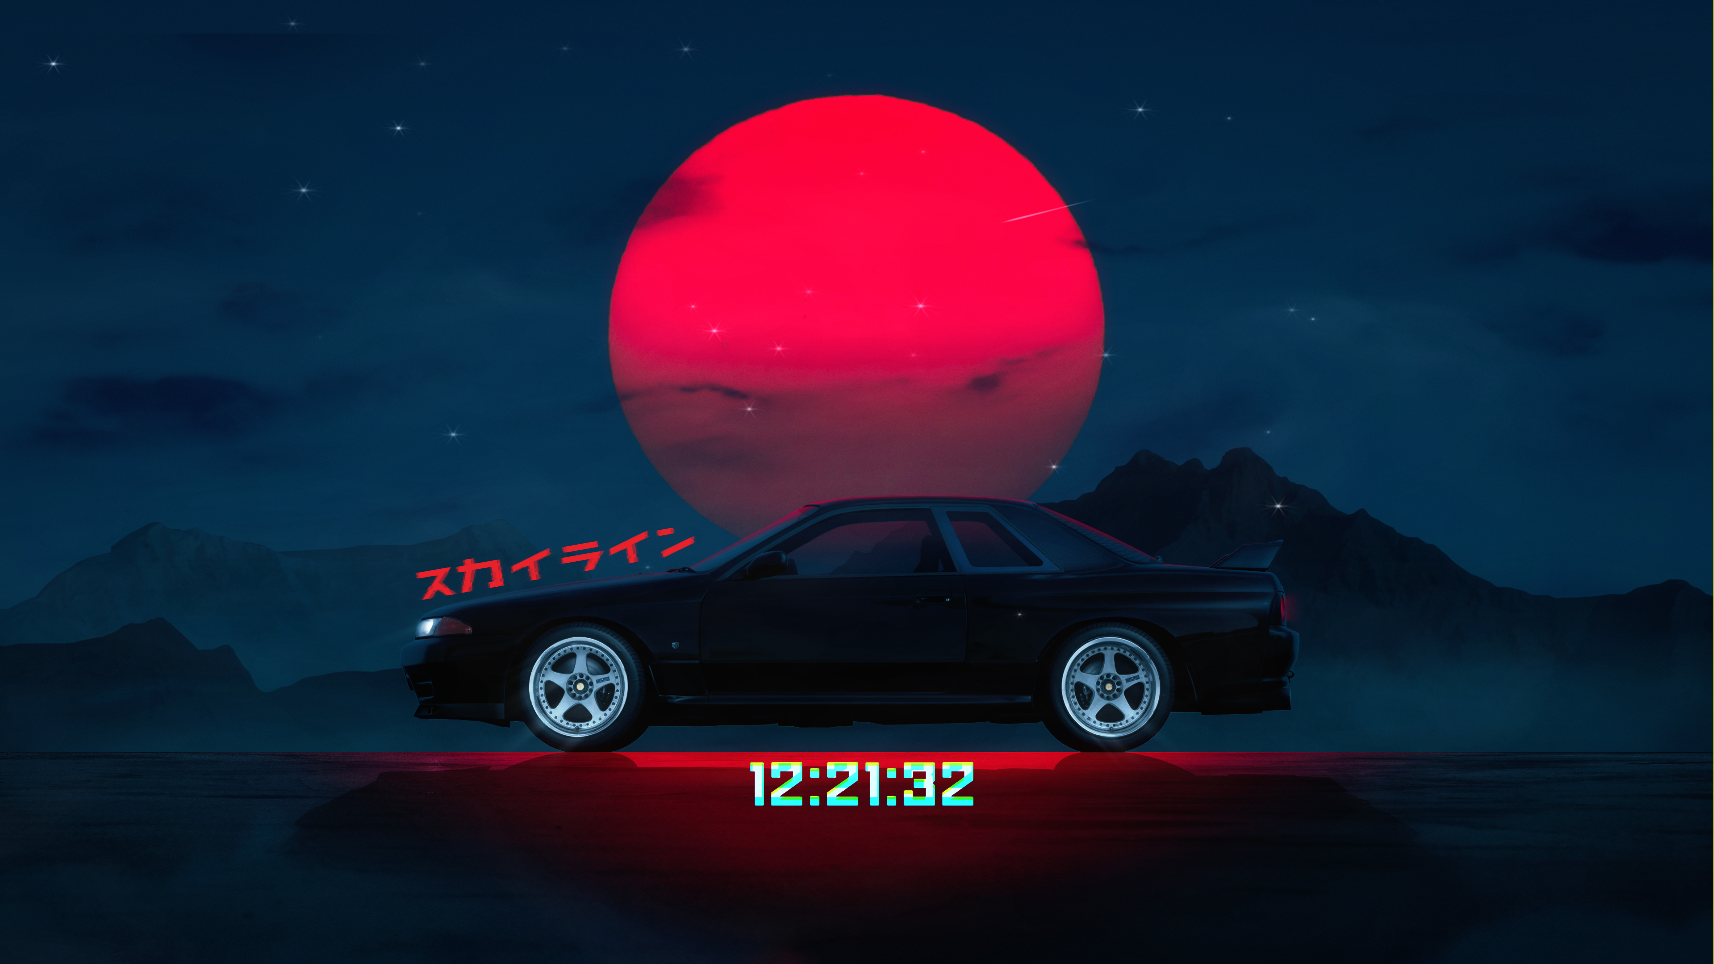 R32 Gtr I Just Finished Really Simple My First Created Wallpaper